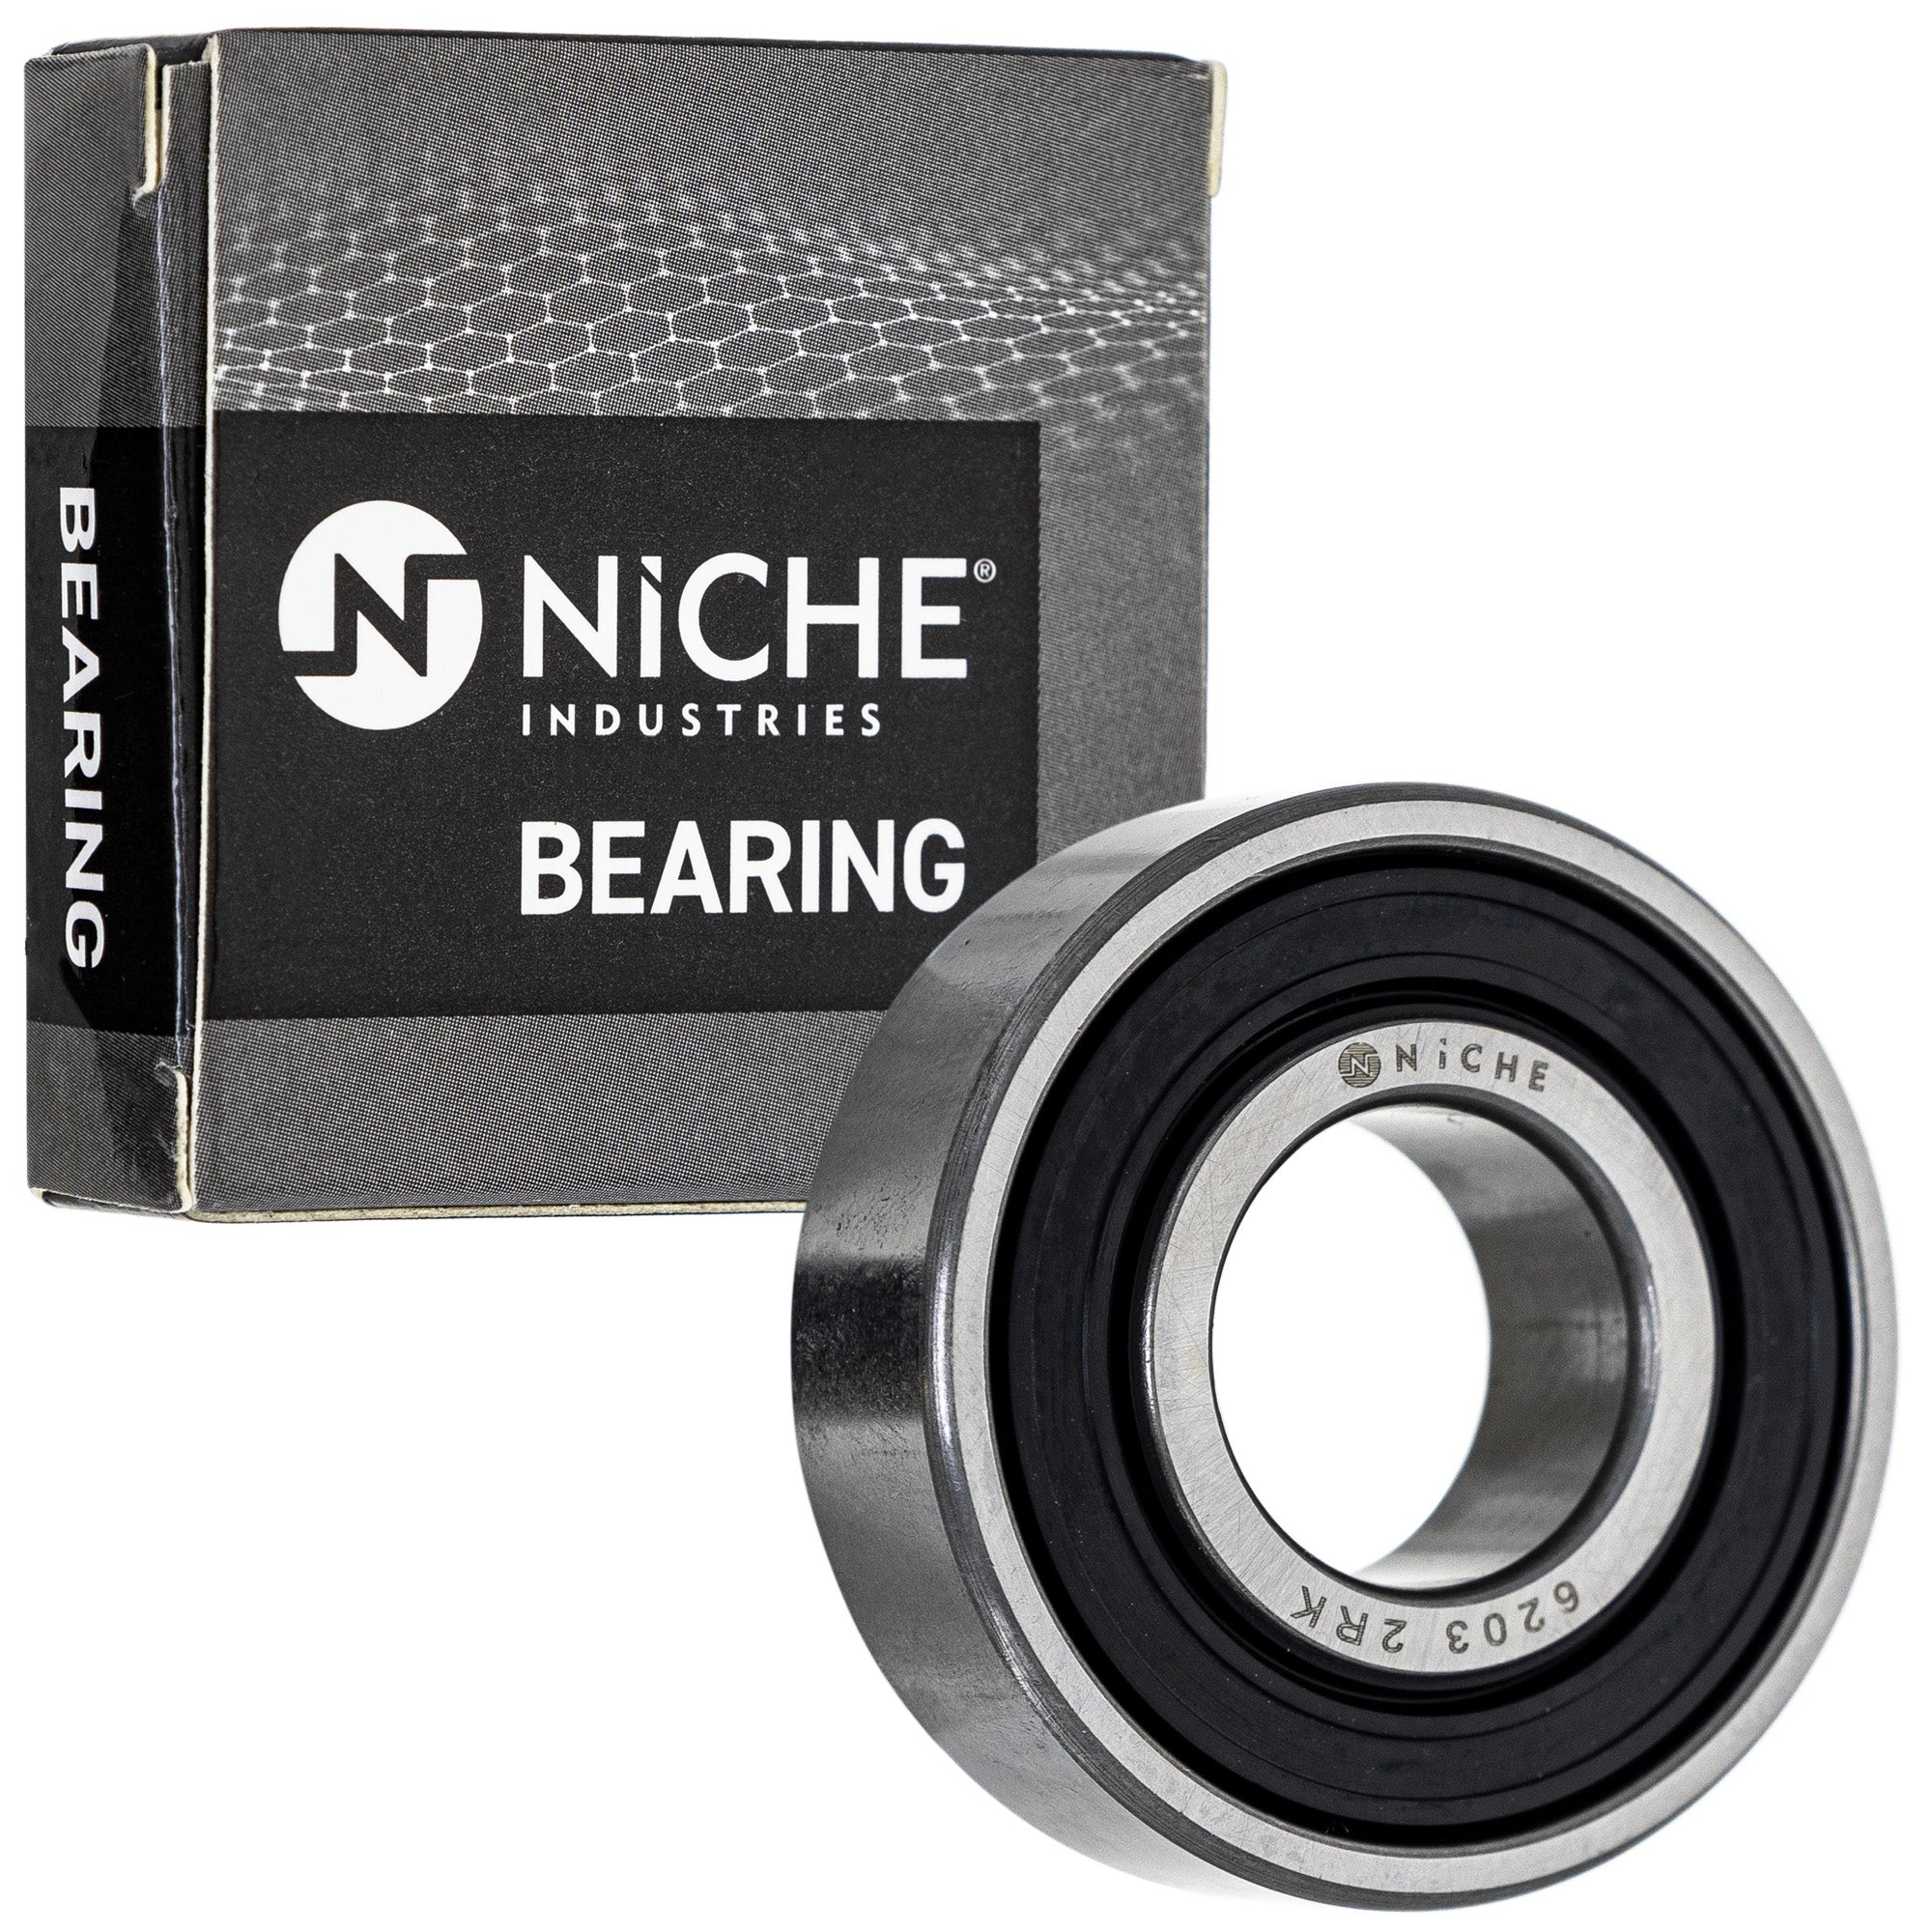 NICHE 519-CBB2280R Bearing 2-Pack for zOTHER Seca Grizzly FZR1000 DS